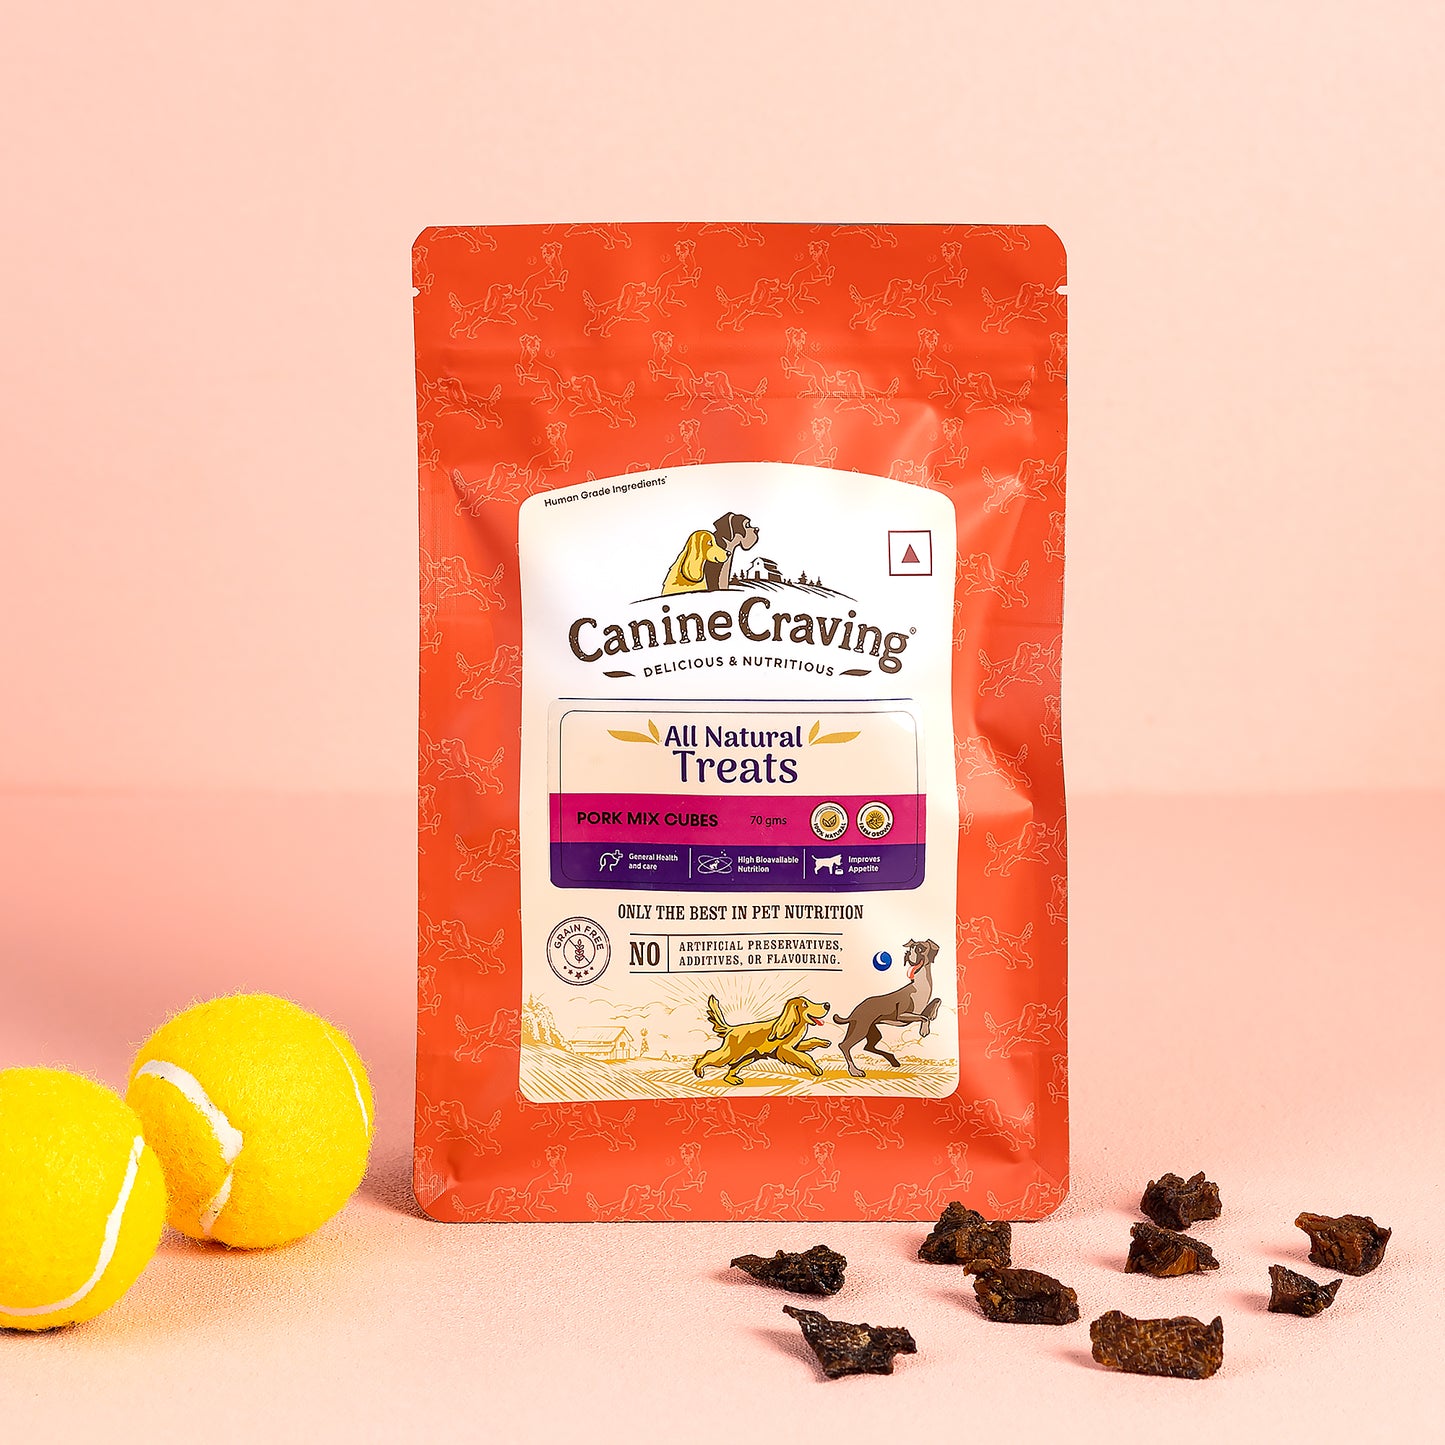 Canine Craving Dehydrated Pork Mix Cubes - 70g